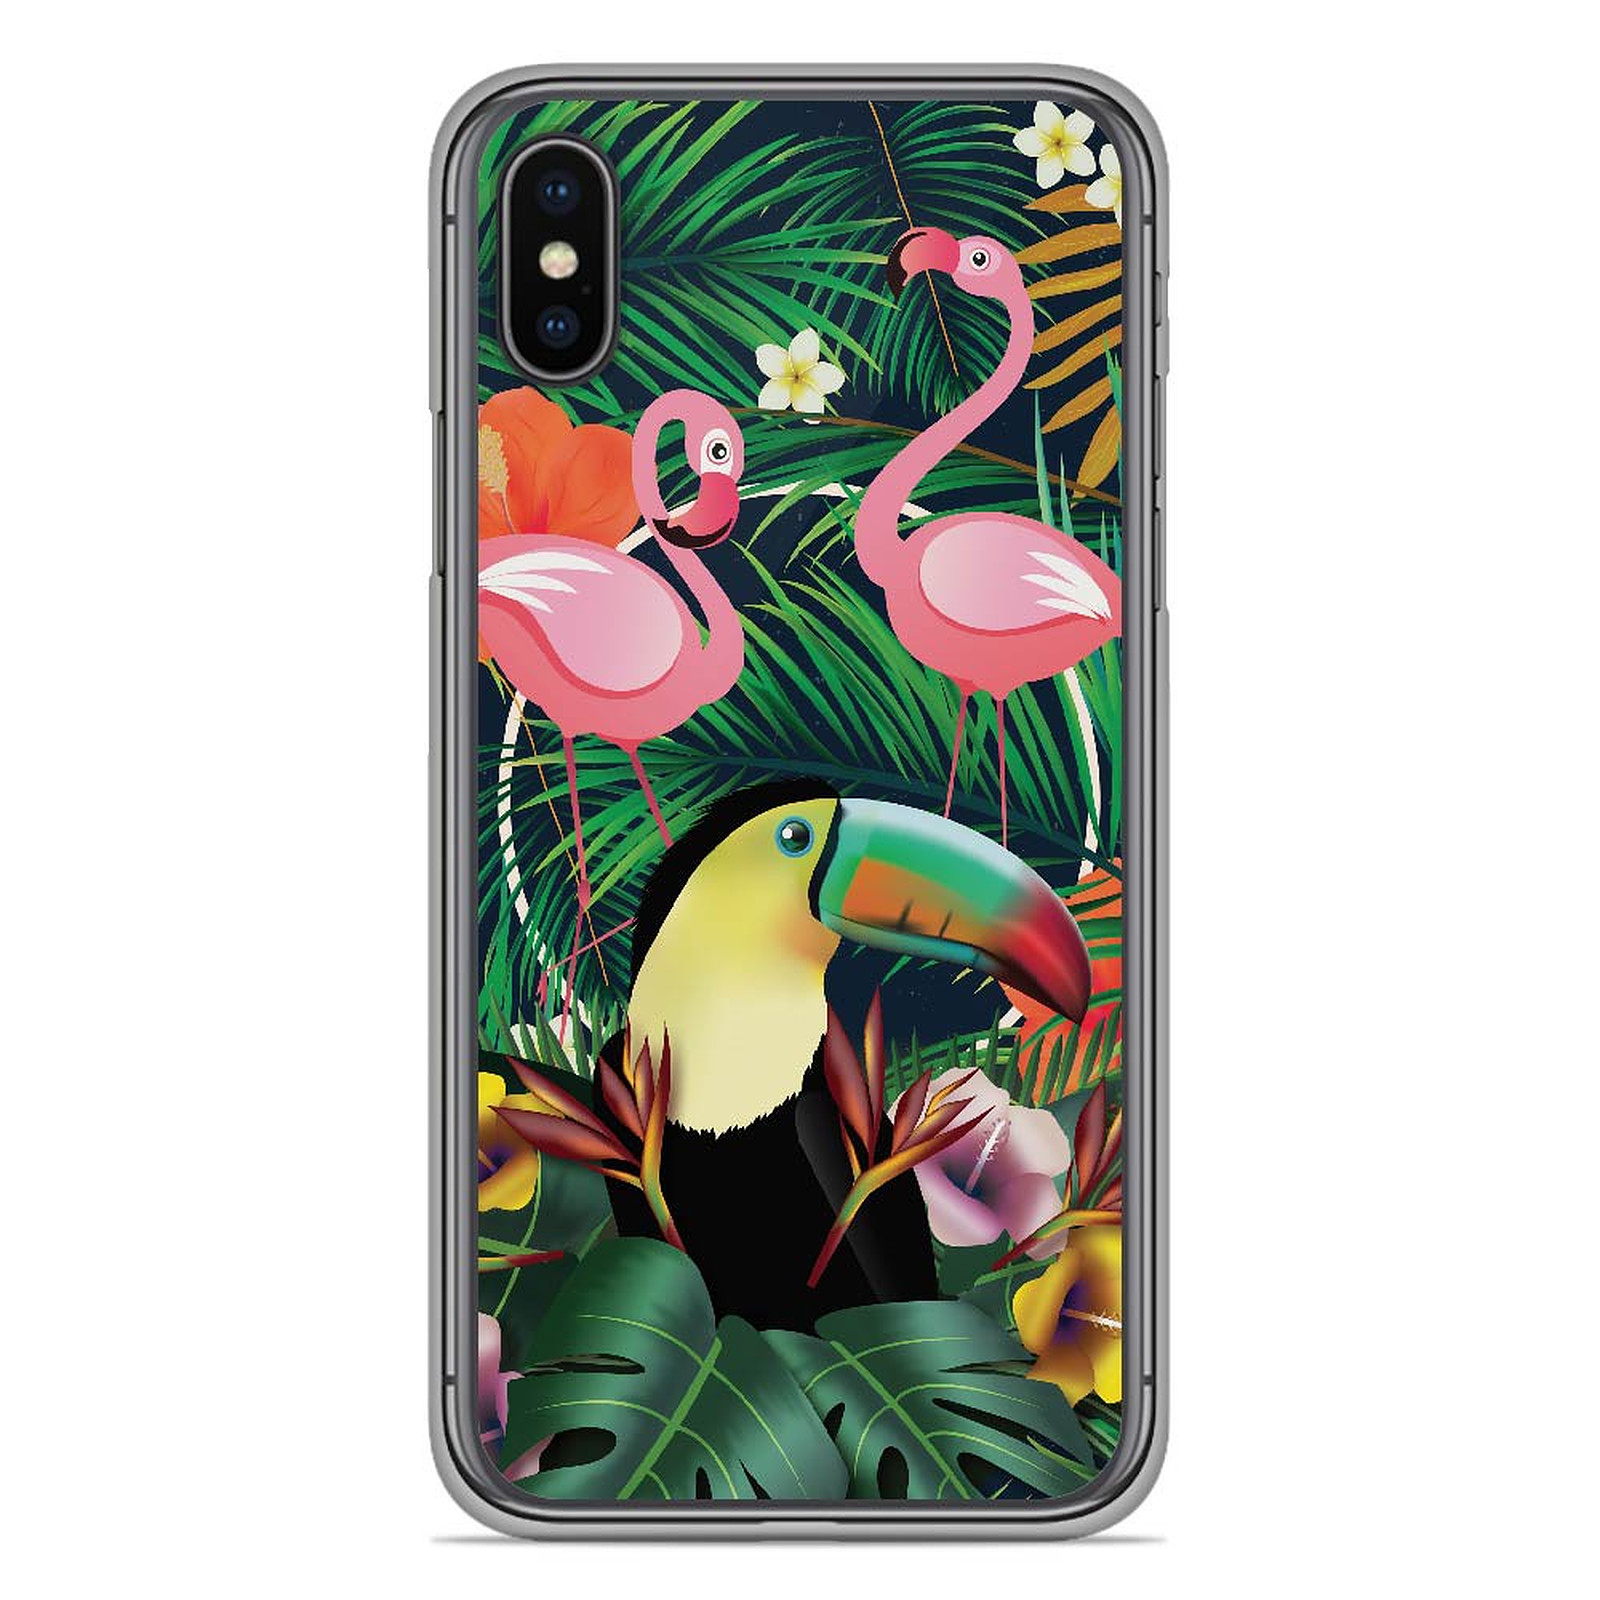 1001 Coques Coque silicone gel Apple iPhone XS Max motif Tropical Toucan - Coque telephone 1001Coques